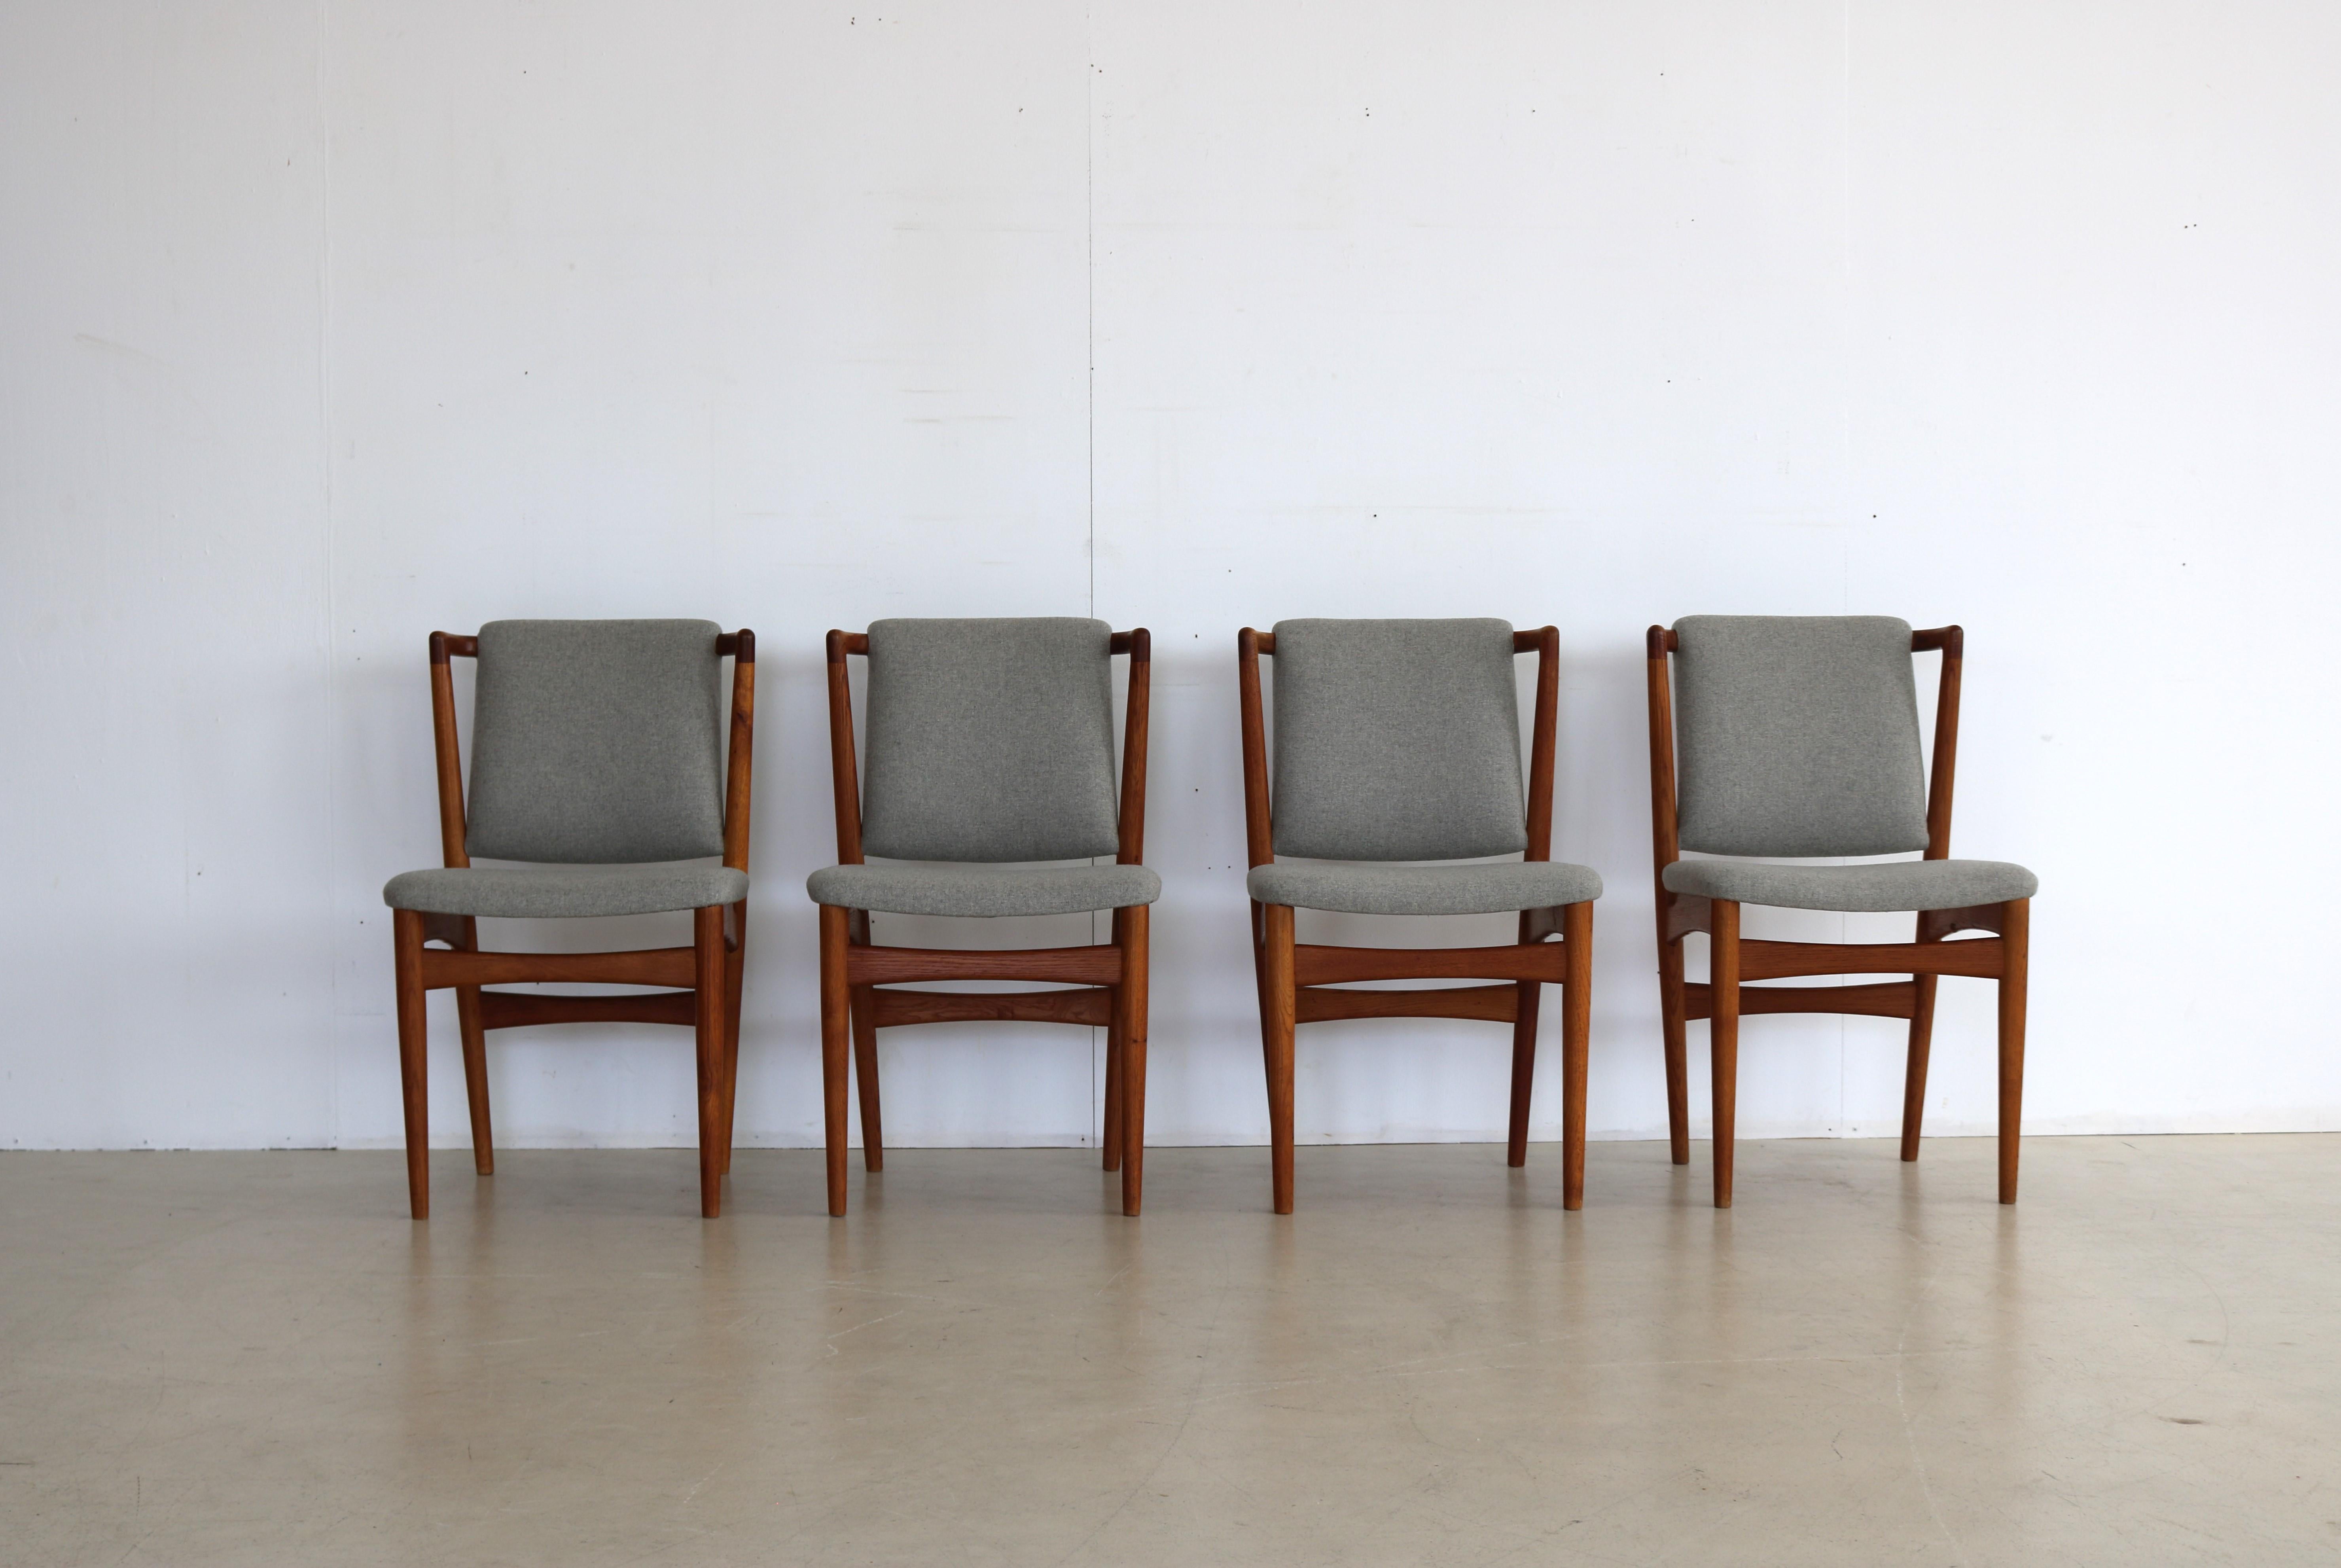 vintage dining room chairs  chairs  Denmark

period  60's
designs  Slagelse Mobelvaerk  Denmark
conditions  excellent  light signs of use  newly upholstered;
size  83x 48 x 50 (hxwxd) seat height 47 cm;

details  teak; textile; set of 4;

article